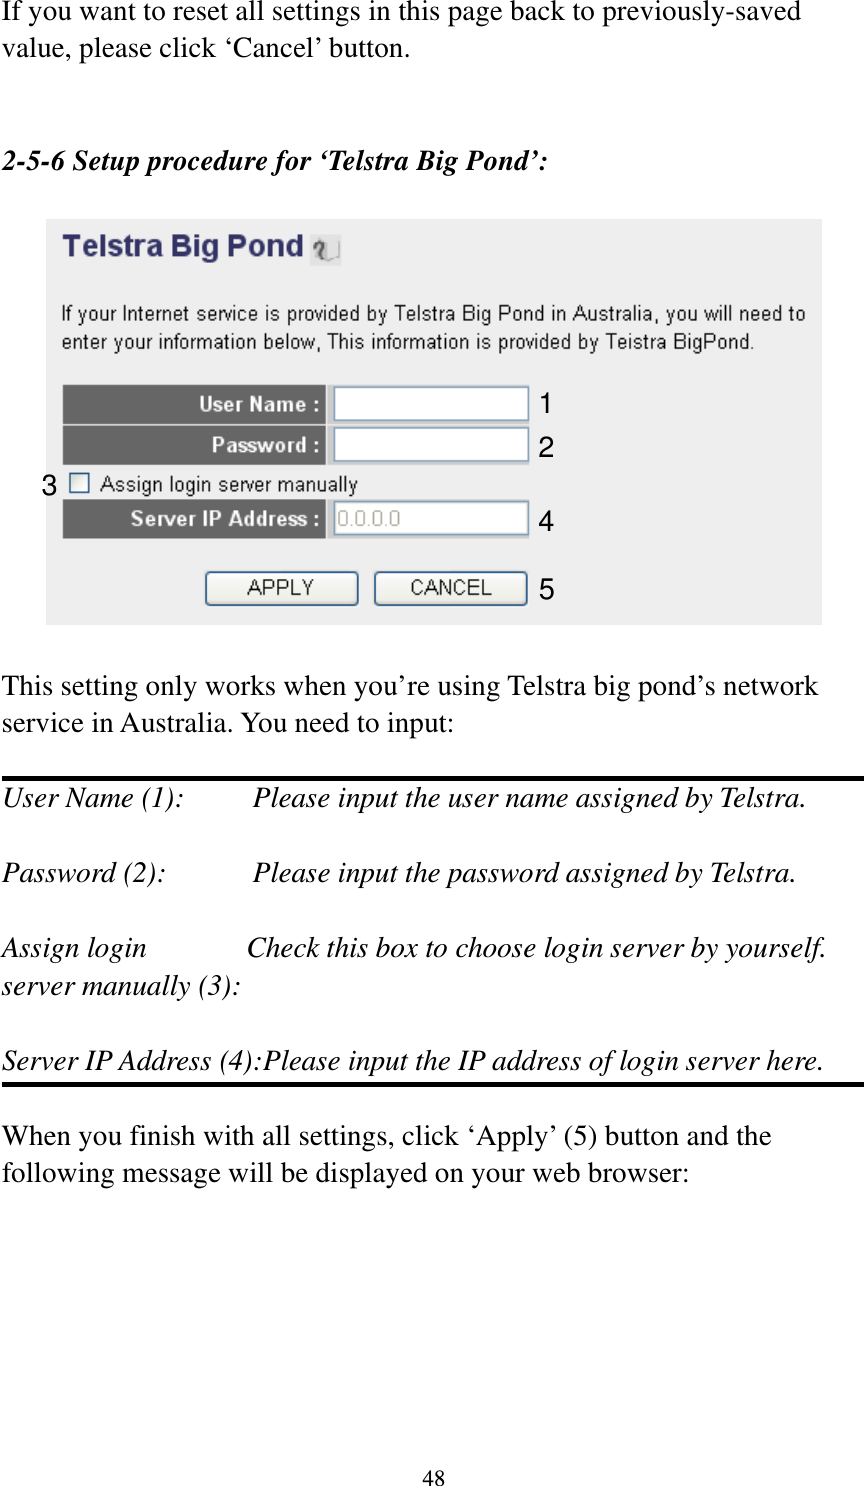 48 If you want to reset all settings in this page back to previously-saved value, please click ‘Cancel’ button.   2-5-6 Setup procedure for ‘Telstra Big Pond’:    This setting only works when you’re using Telstra big pond’s network service in Australia. You need to input:  User Name (1):     Please input the user name assigned by Telstra.  Password (2):      Please input the password assigned by Telstra.  Assign login          Check this box to choose login server by yourself. server manually (3):    Server IP Address (4):Please input the IP address of login server here.  When you finish with all settings, click ‘Apply’ (5) button and the following message will be displayed on your web browser:  123 4 5 